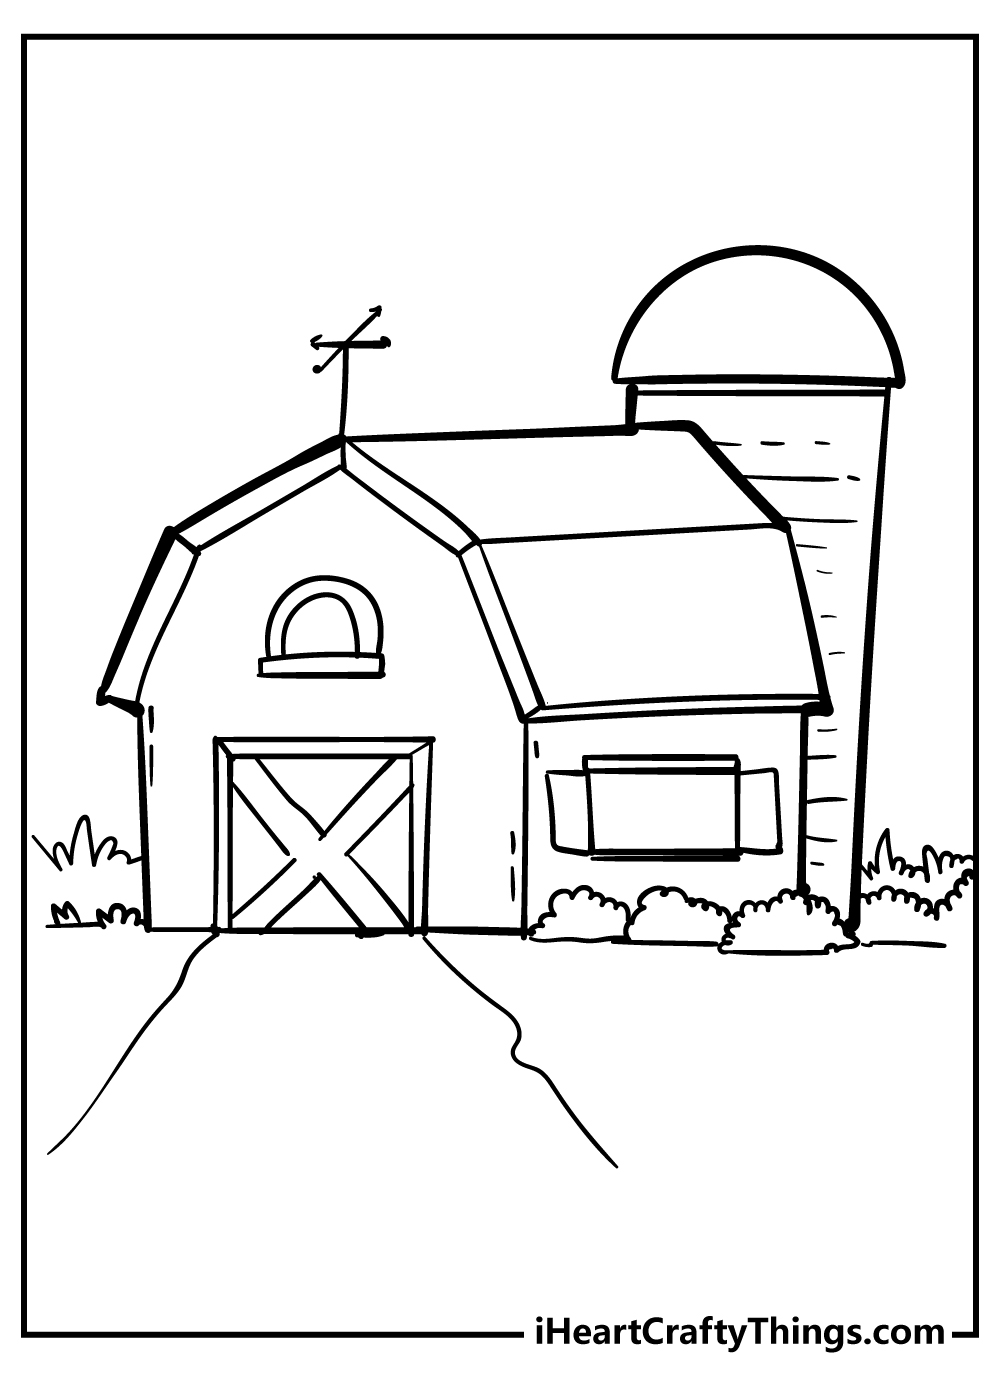 Barn Coloring Pages for adults free printable